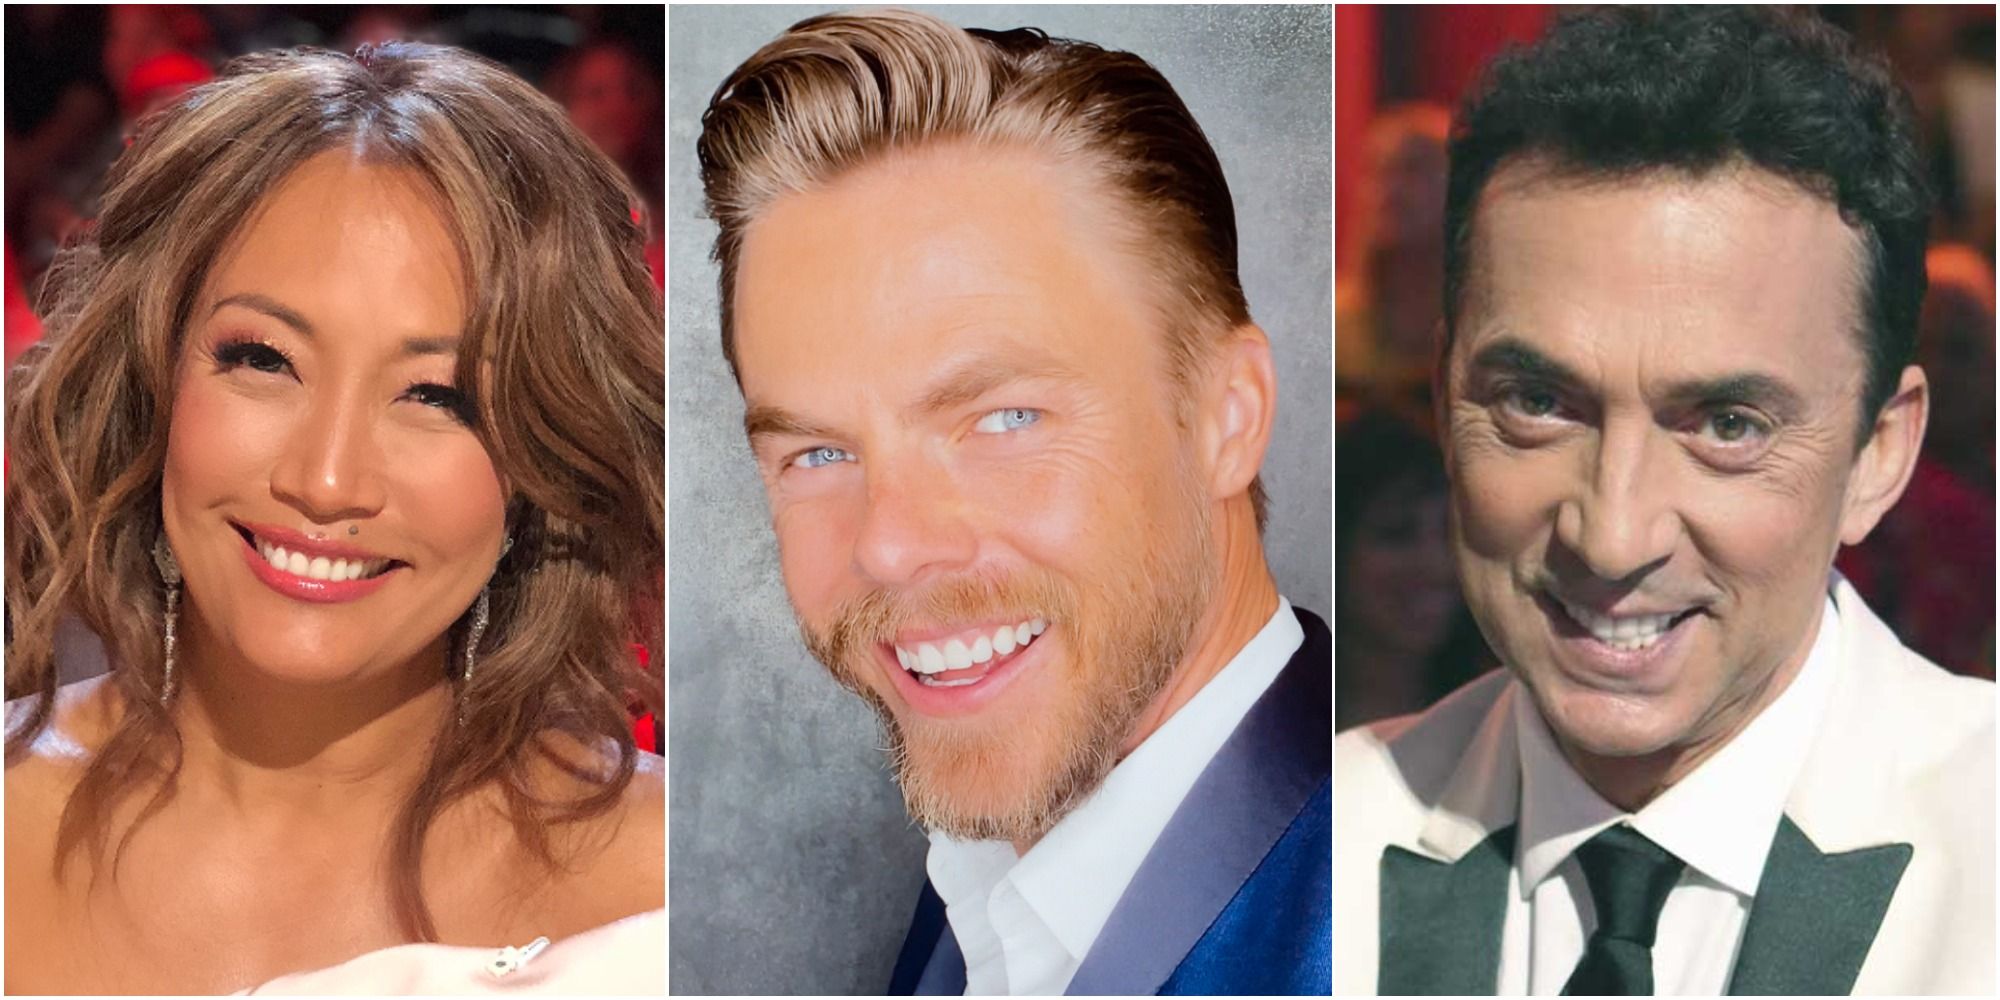 Carrie Ann Inaba Derek Hough And Bruno Tonioli As Judges On Dancing With The Stars 2020 